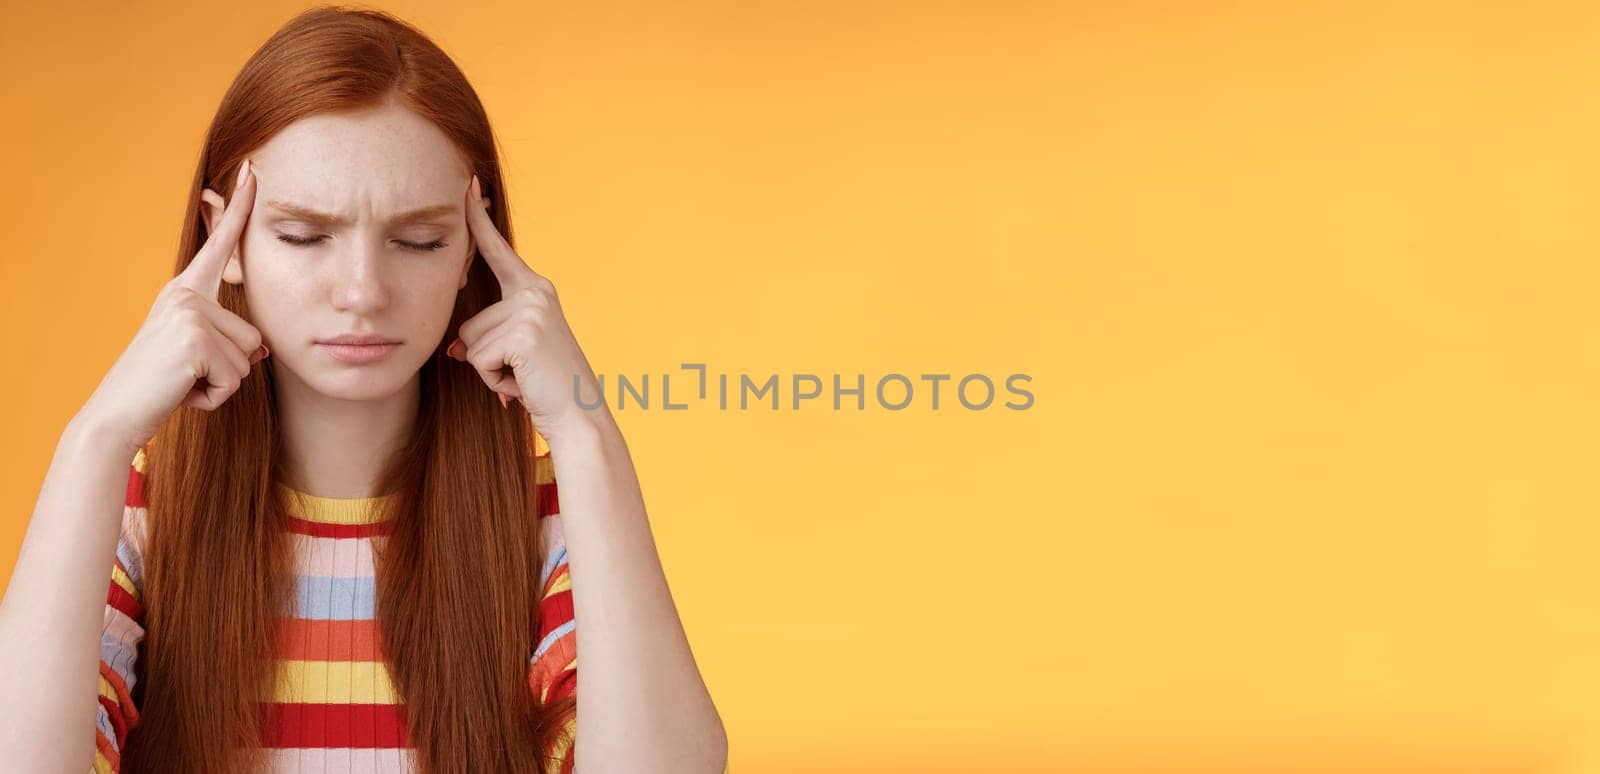 Girl getting thoughts piled trying think stright focusing concentrating important task remember number touch temples close eyes look seriously standing puzzled suffer headache, orange background.